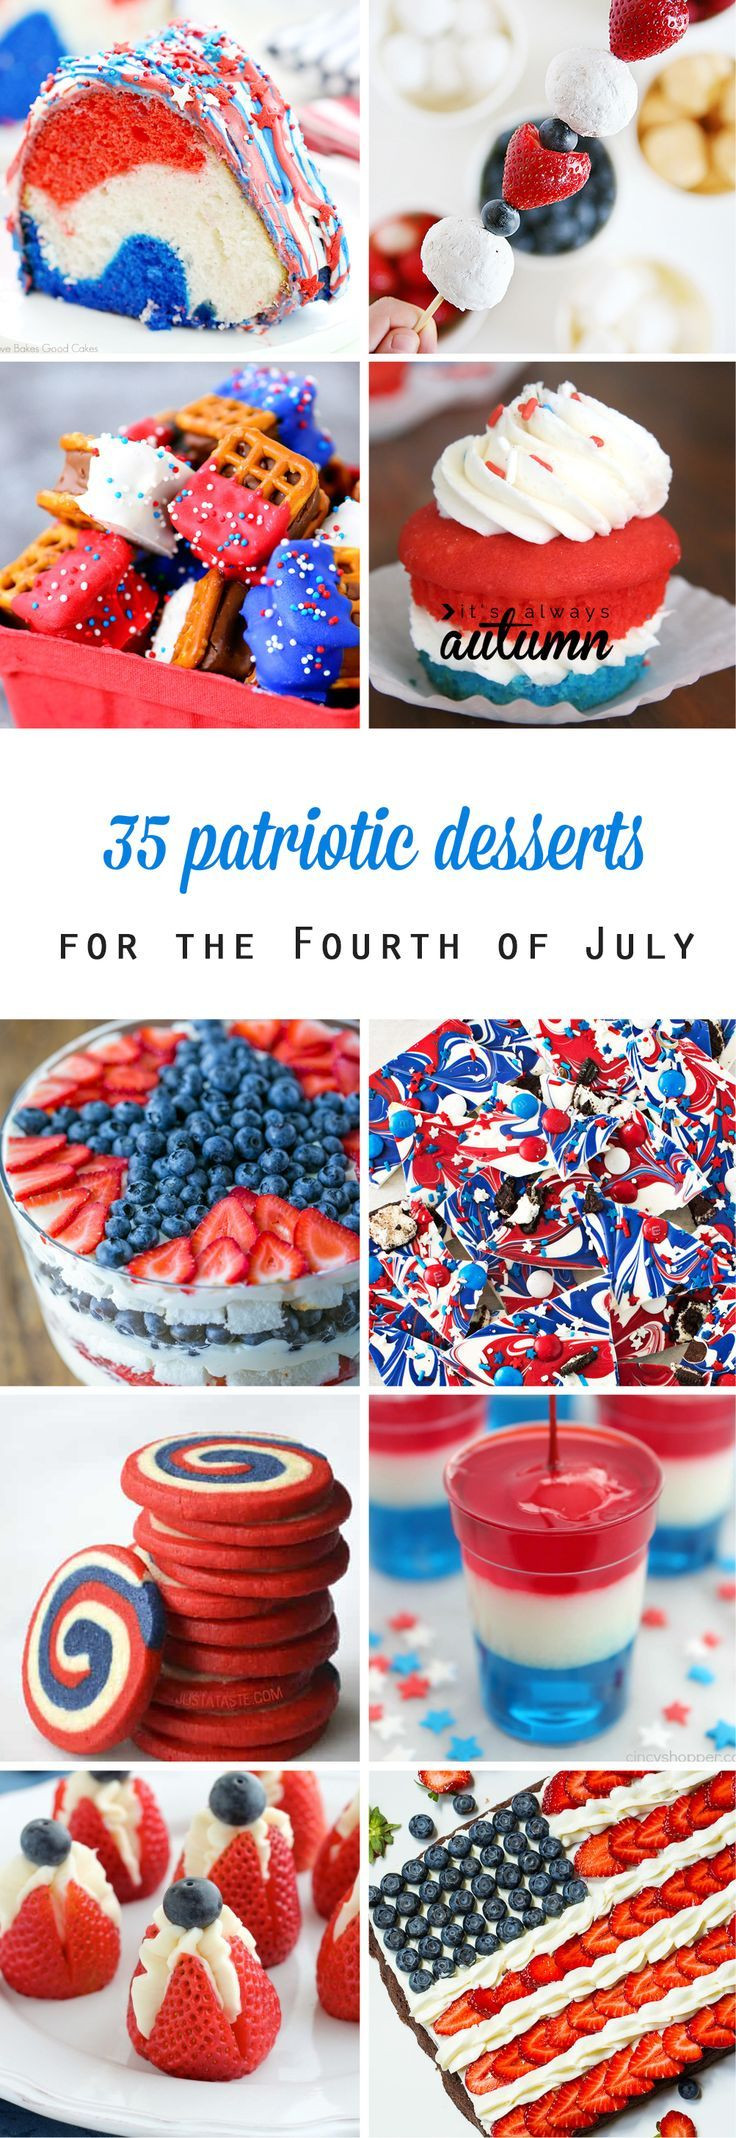 Best Fourth Of July Desserts
 868 best images about 4th of July Food on Pinterest